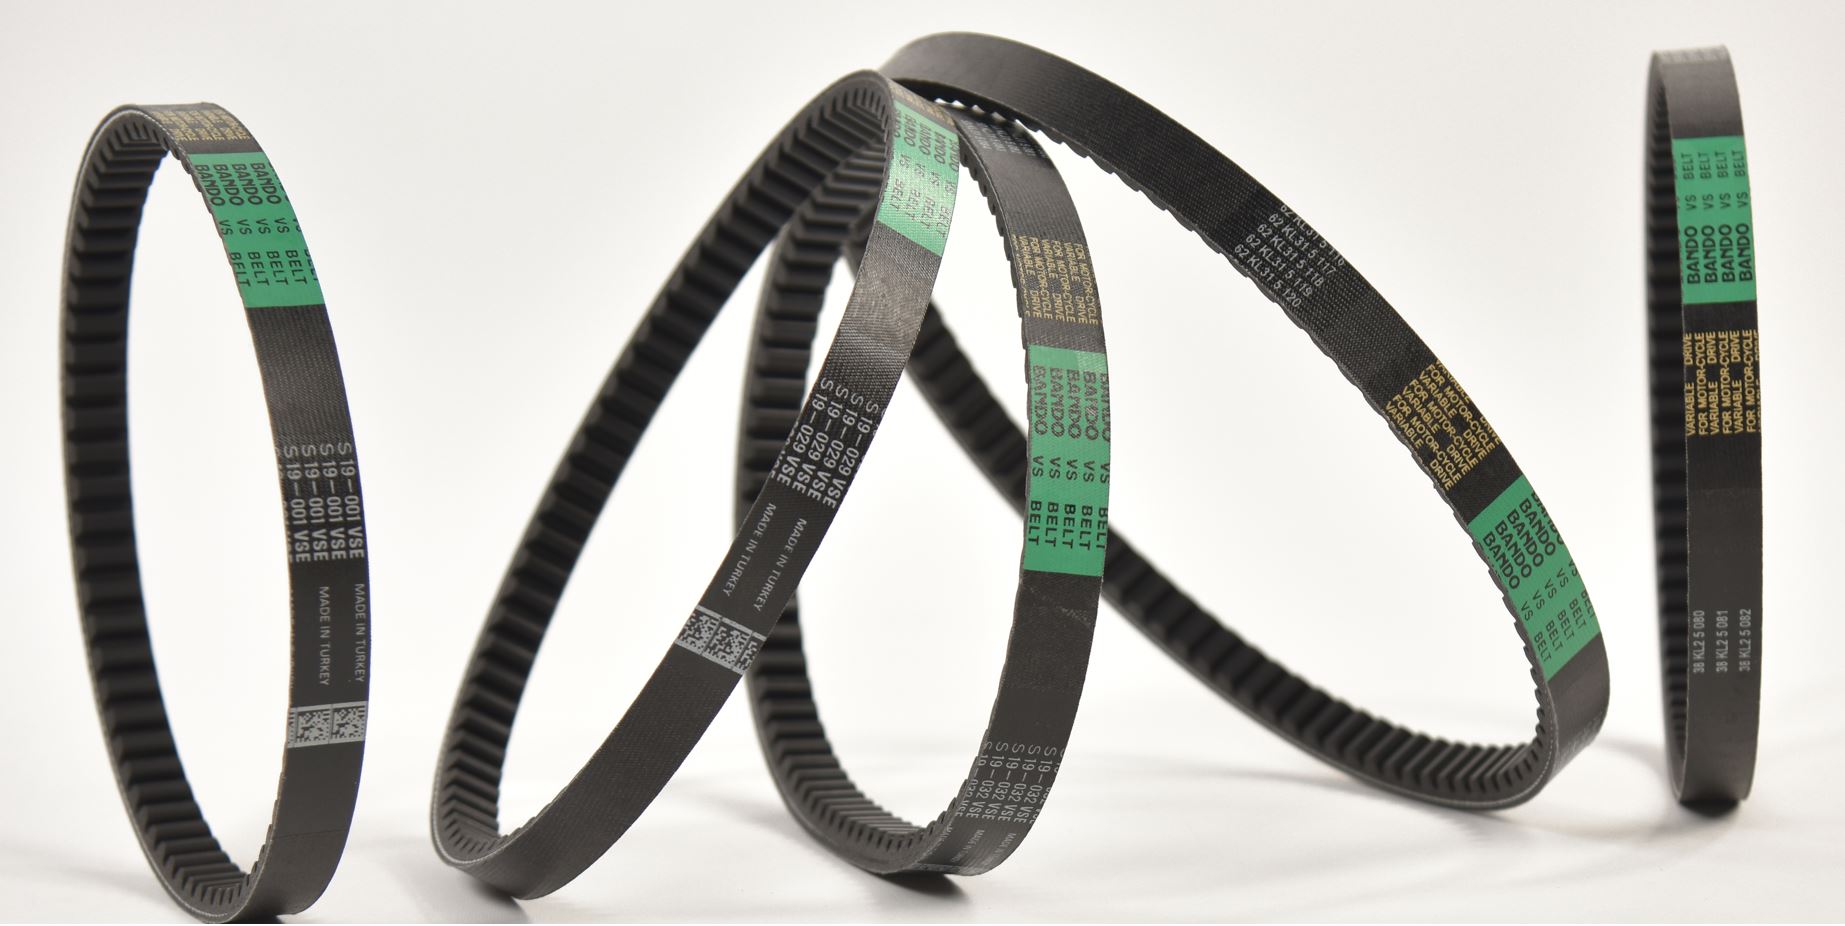 Bando started production of motorcycle belts in Turkey.